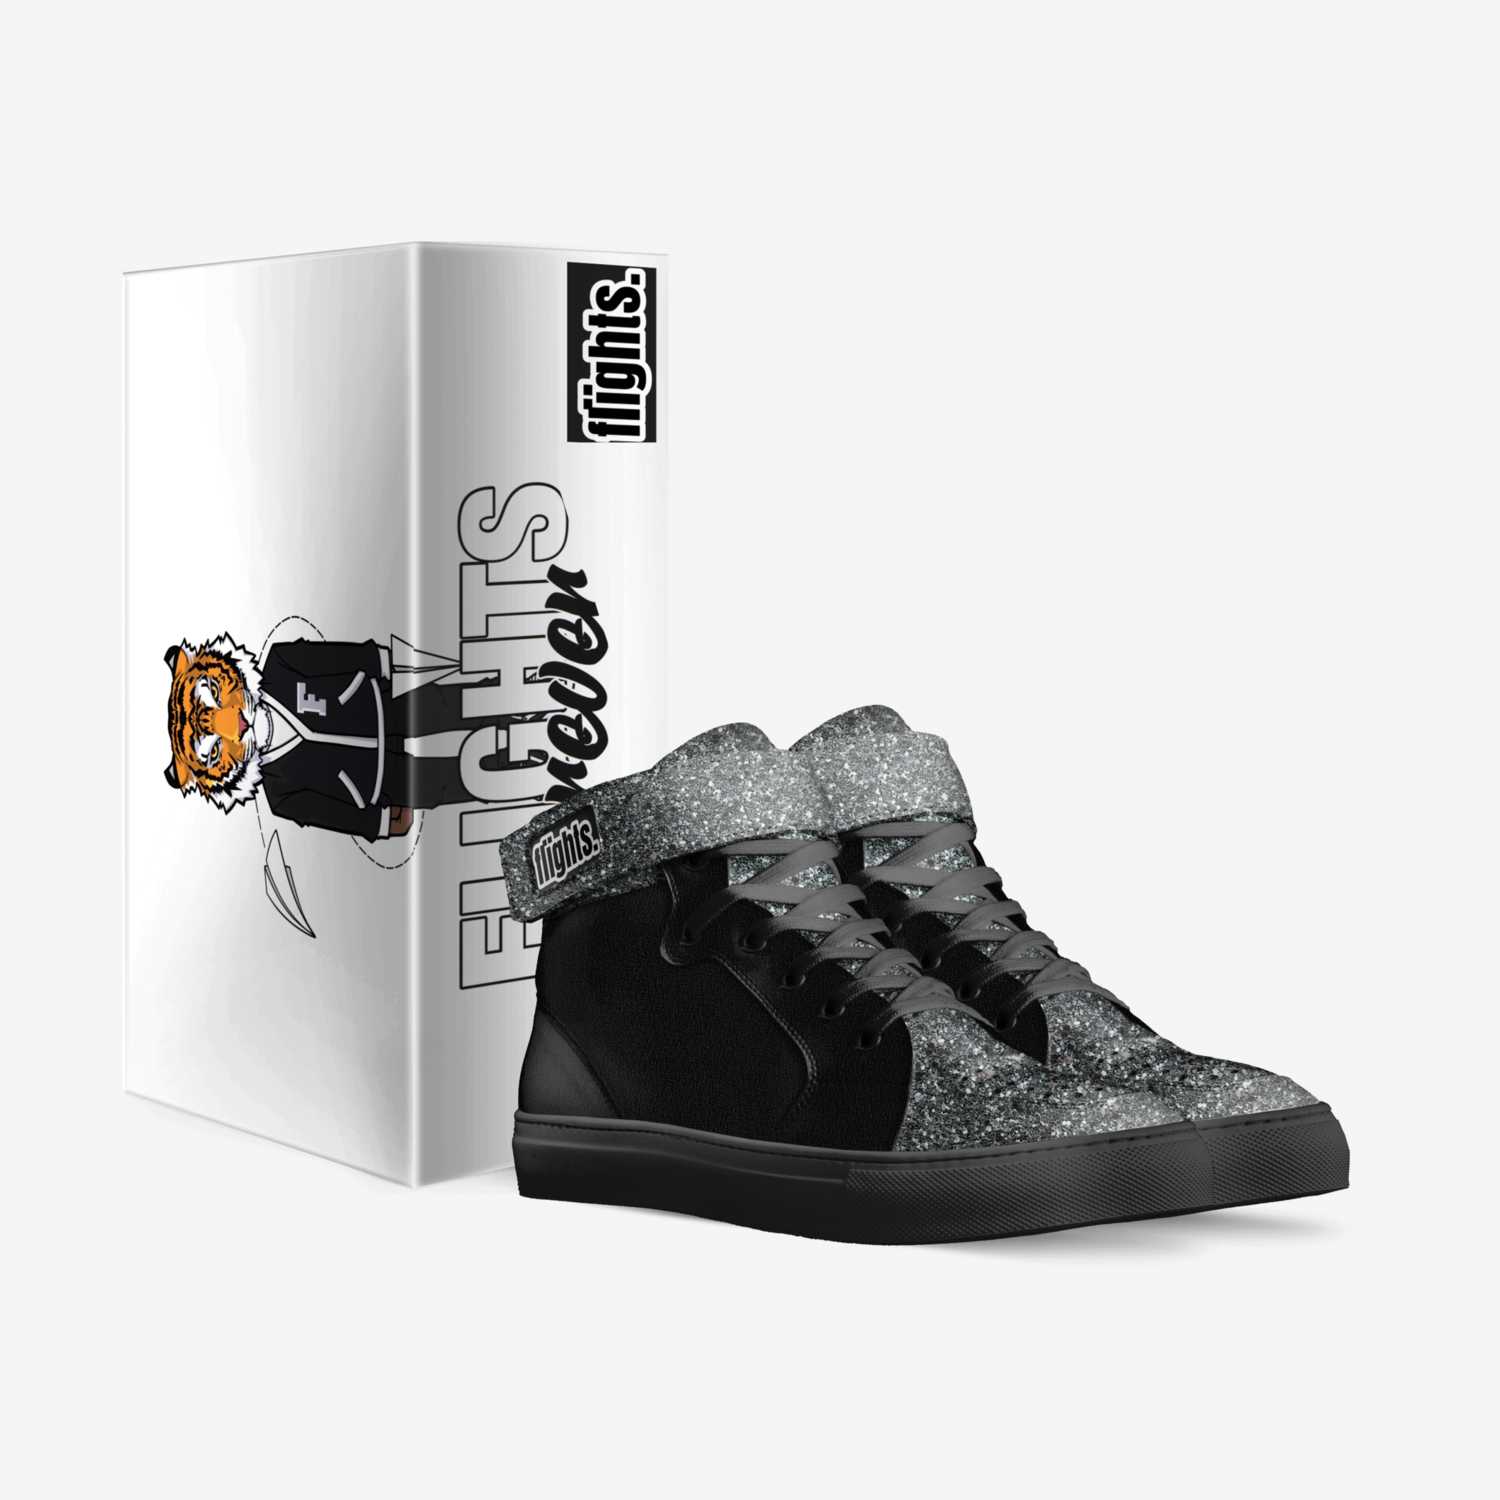 Foreva Fly custom made in Italy shoes by Foreva Flyy | Box view